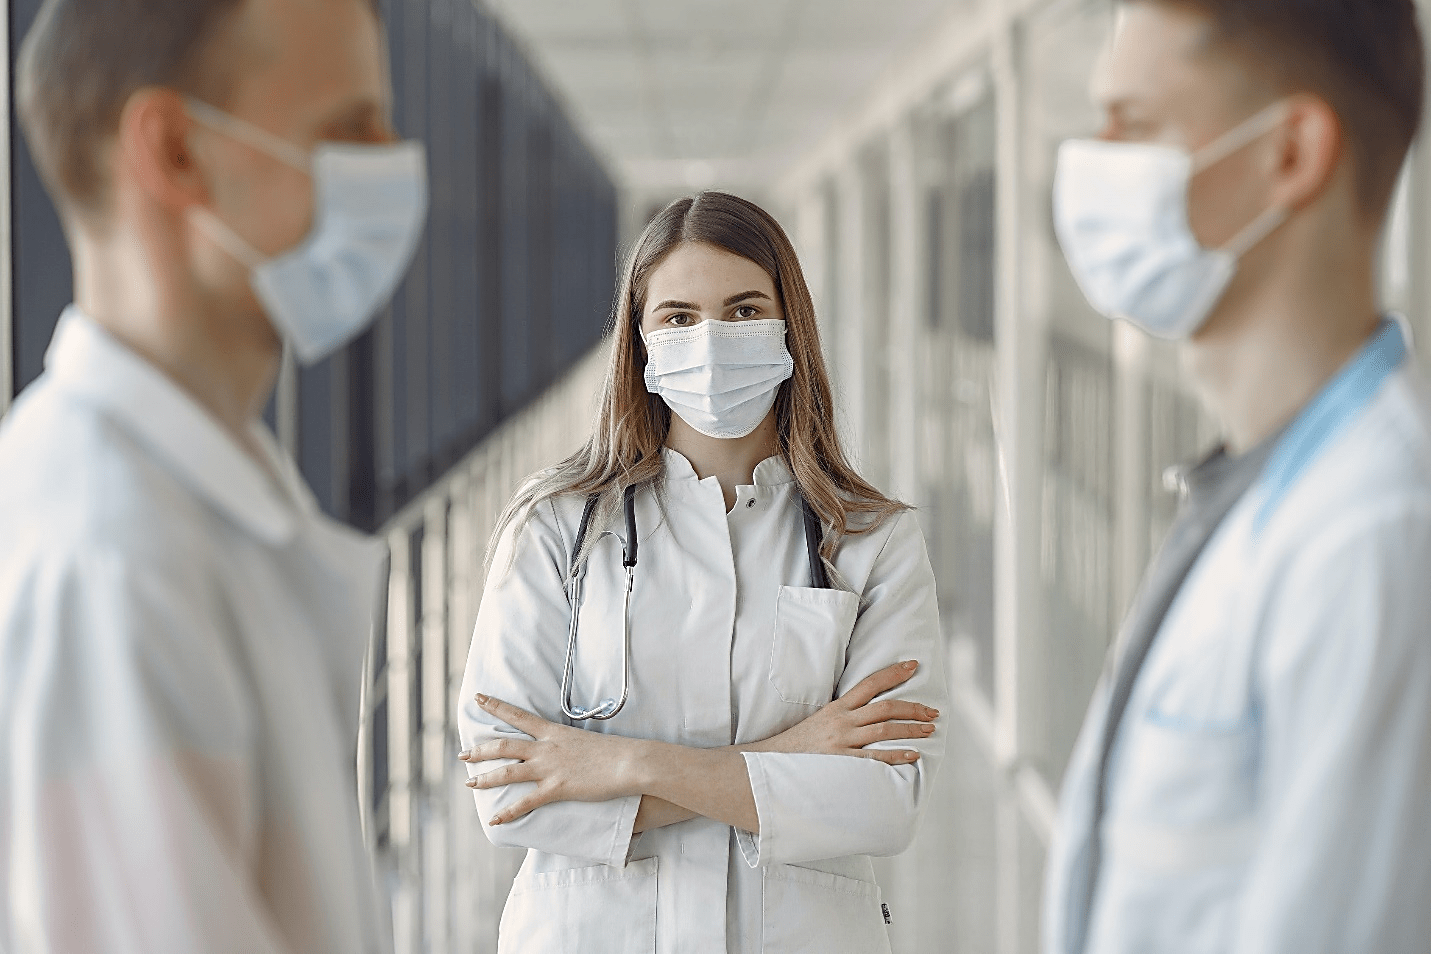 Eight Rules To Abide by as a Healthcare Professional